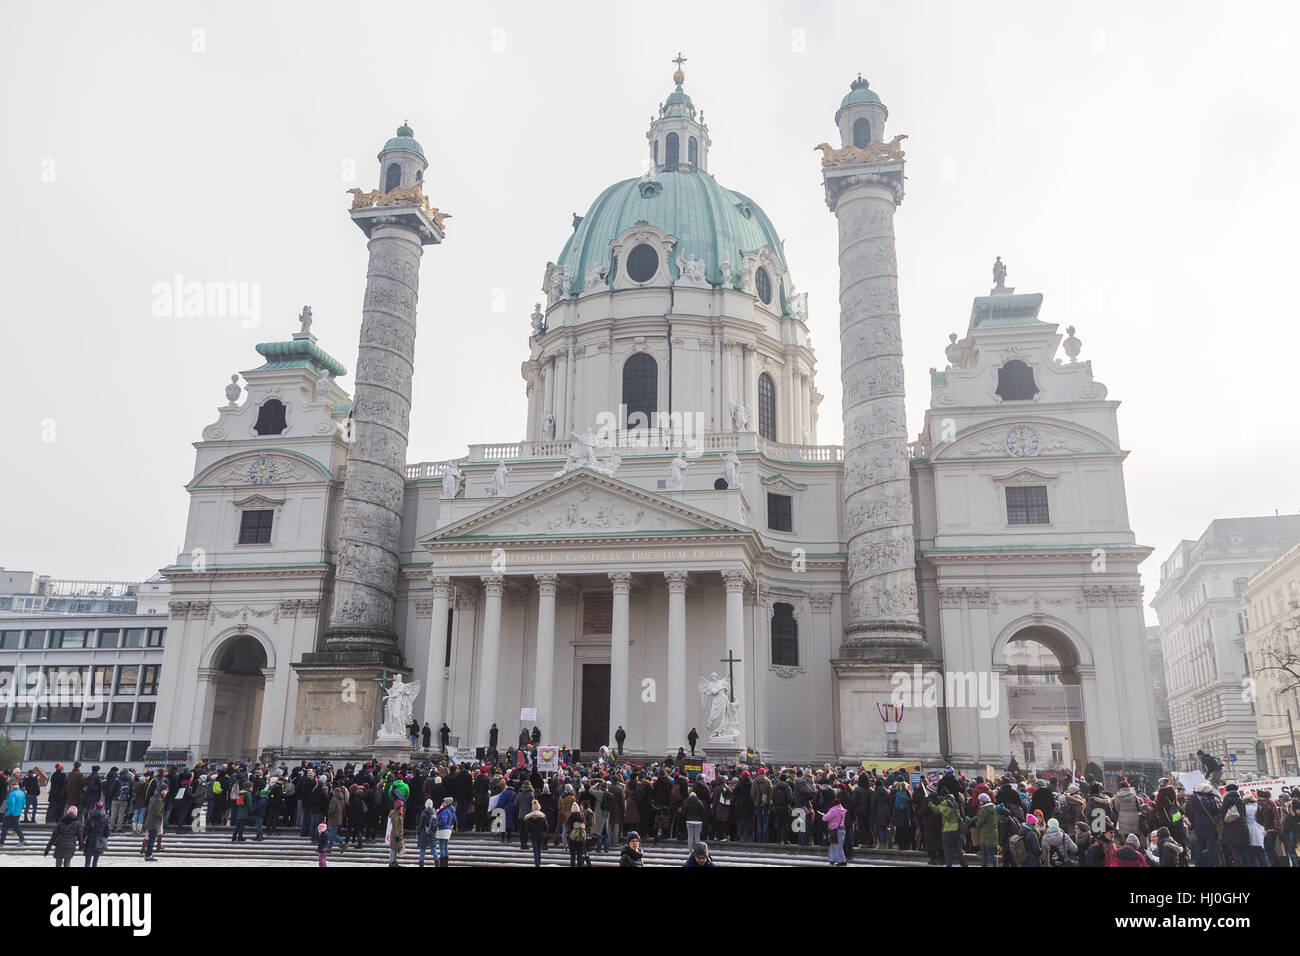 Vienna, Austria. 21st Jan, 2017. Demonstrators at a march outside Karlskirche in Vienna Austria, following the start of Donald Trump's presidency of the United States of America. Credit: Mike Clegg/Alamy Live News. Stock Photo